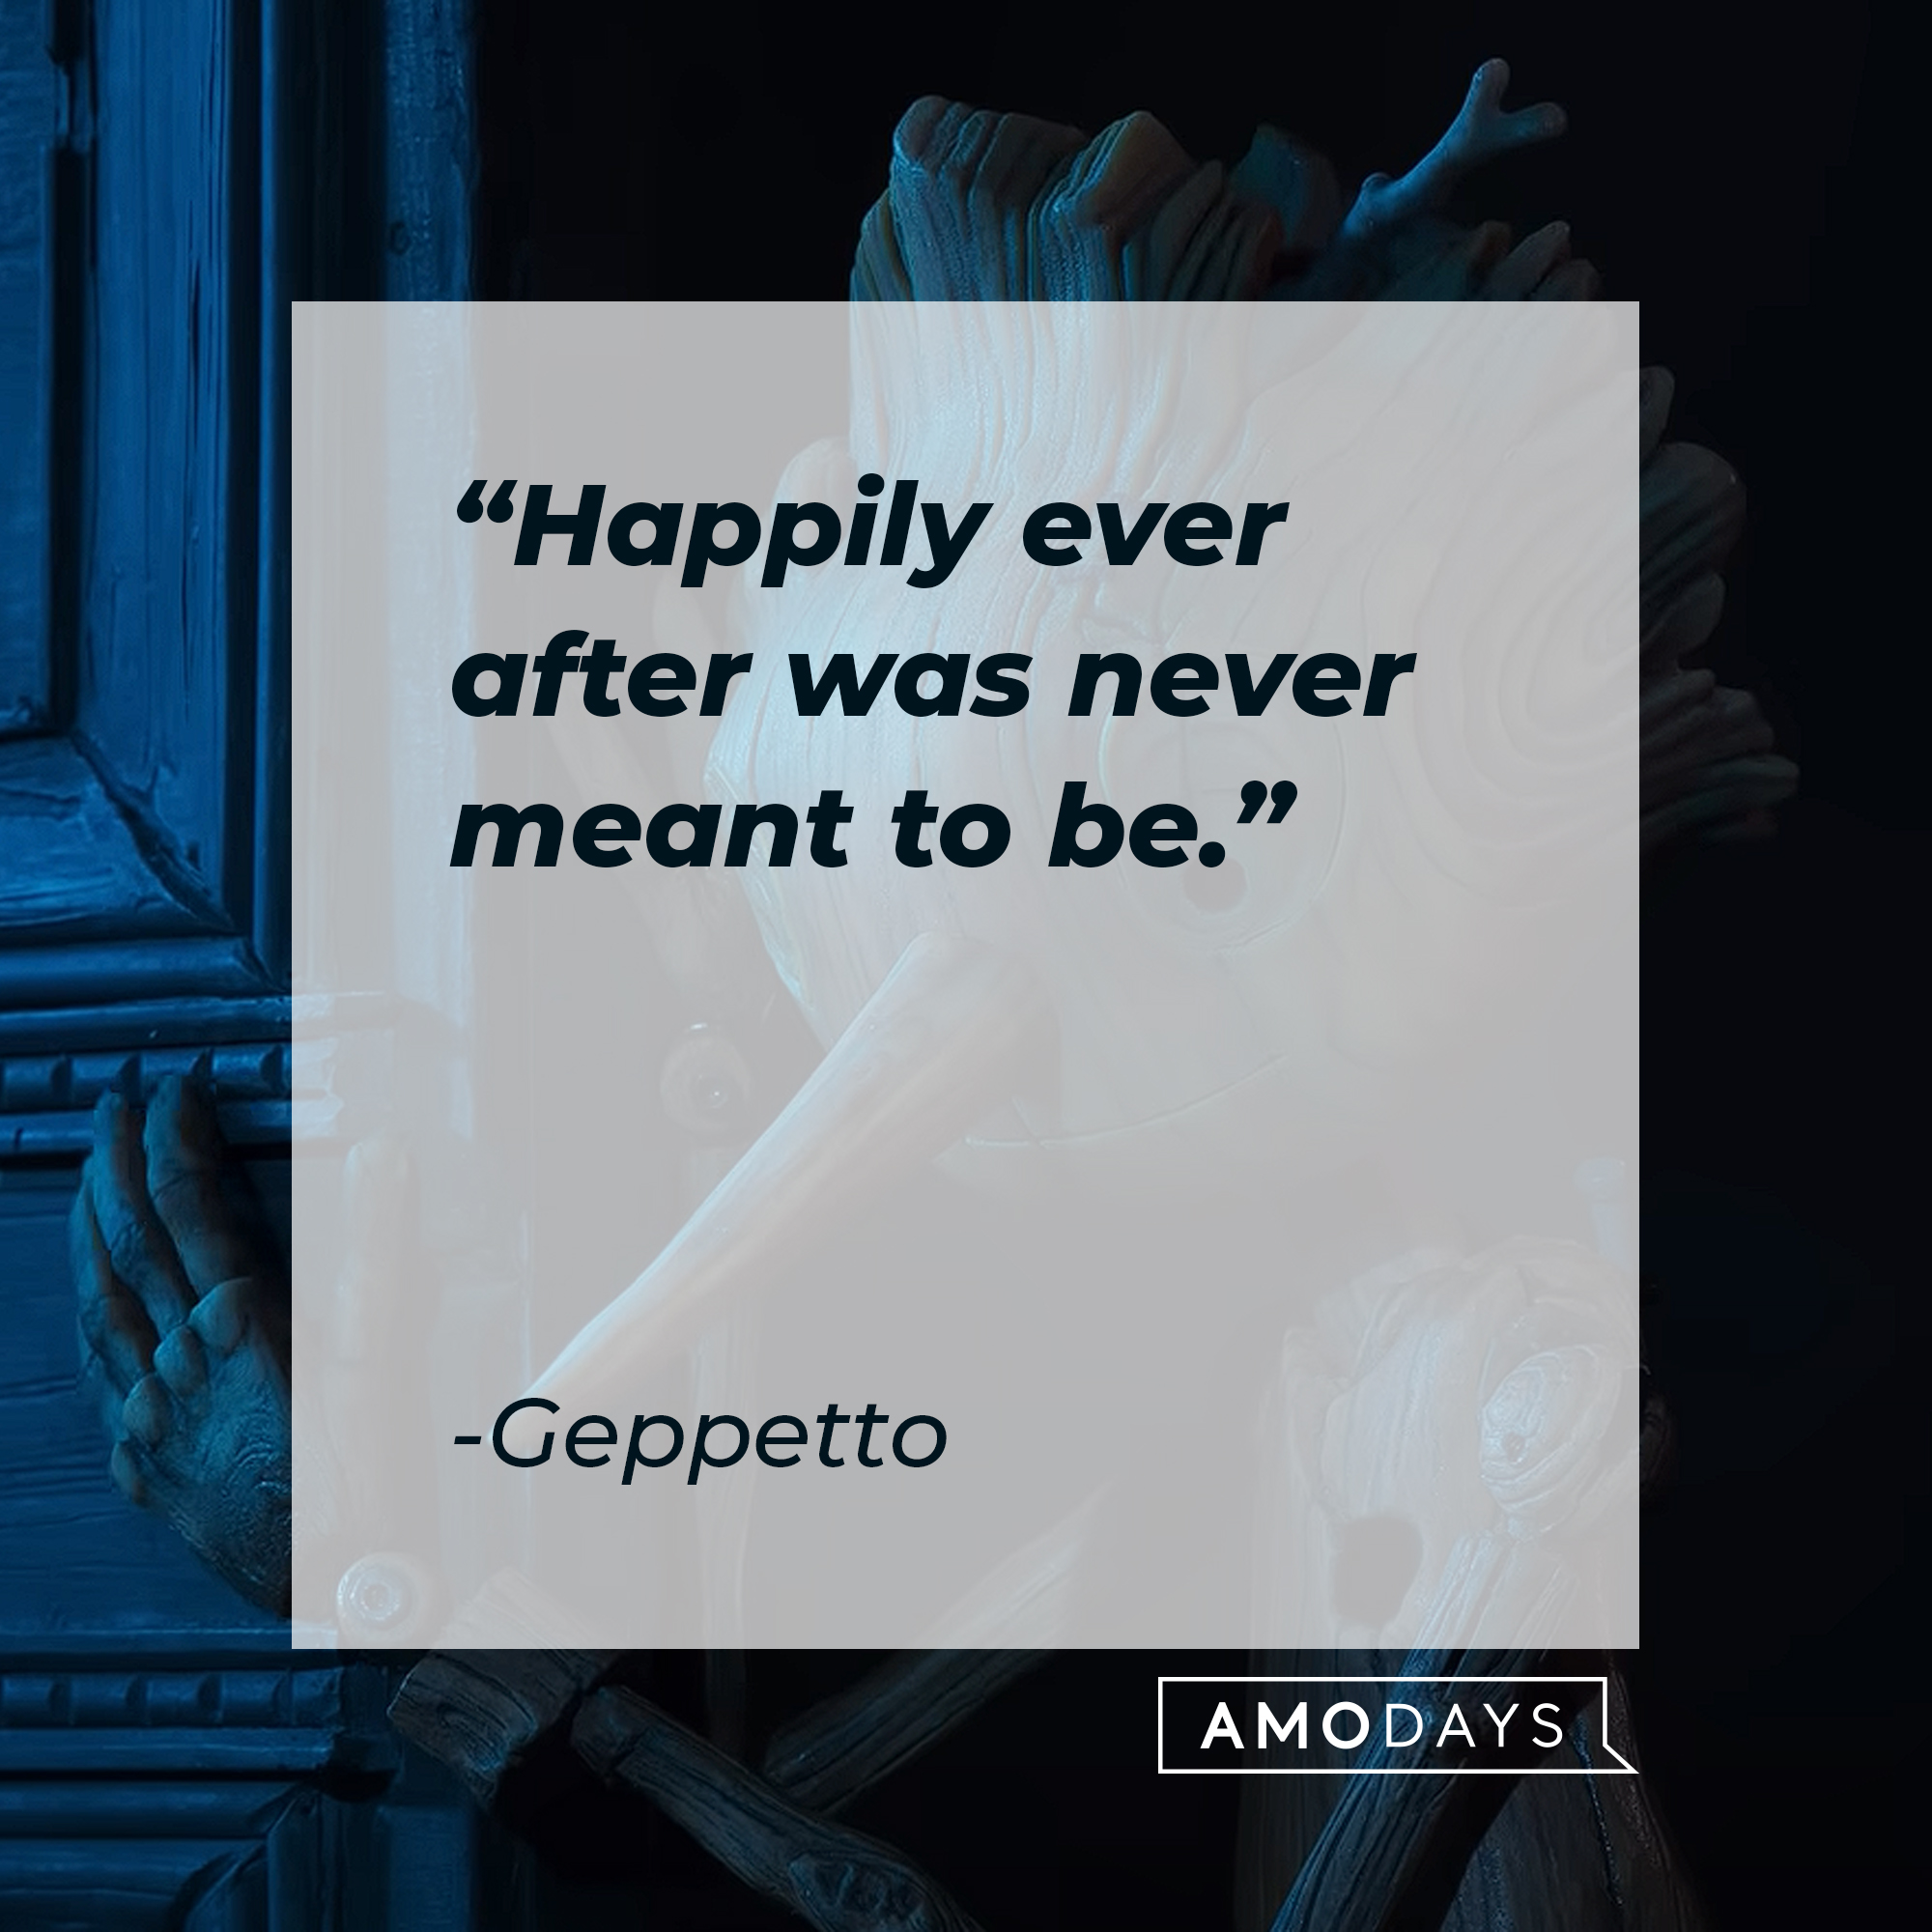 Geppetto's quote: "Happily ever after was never meant to be." | Image: AmoDays